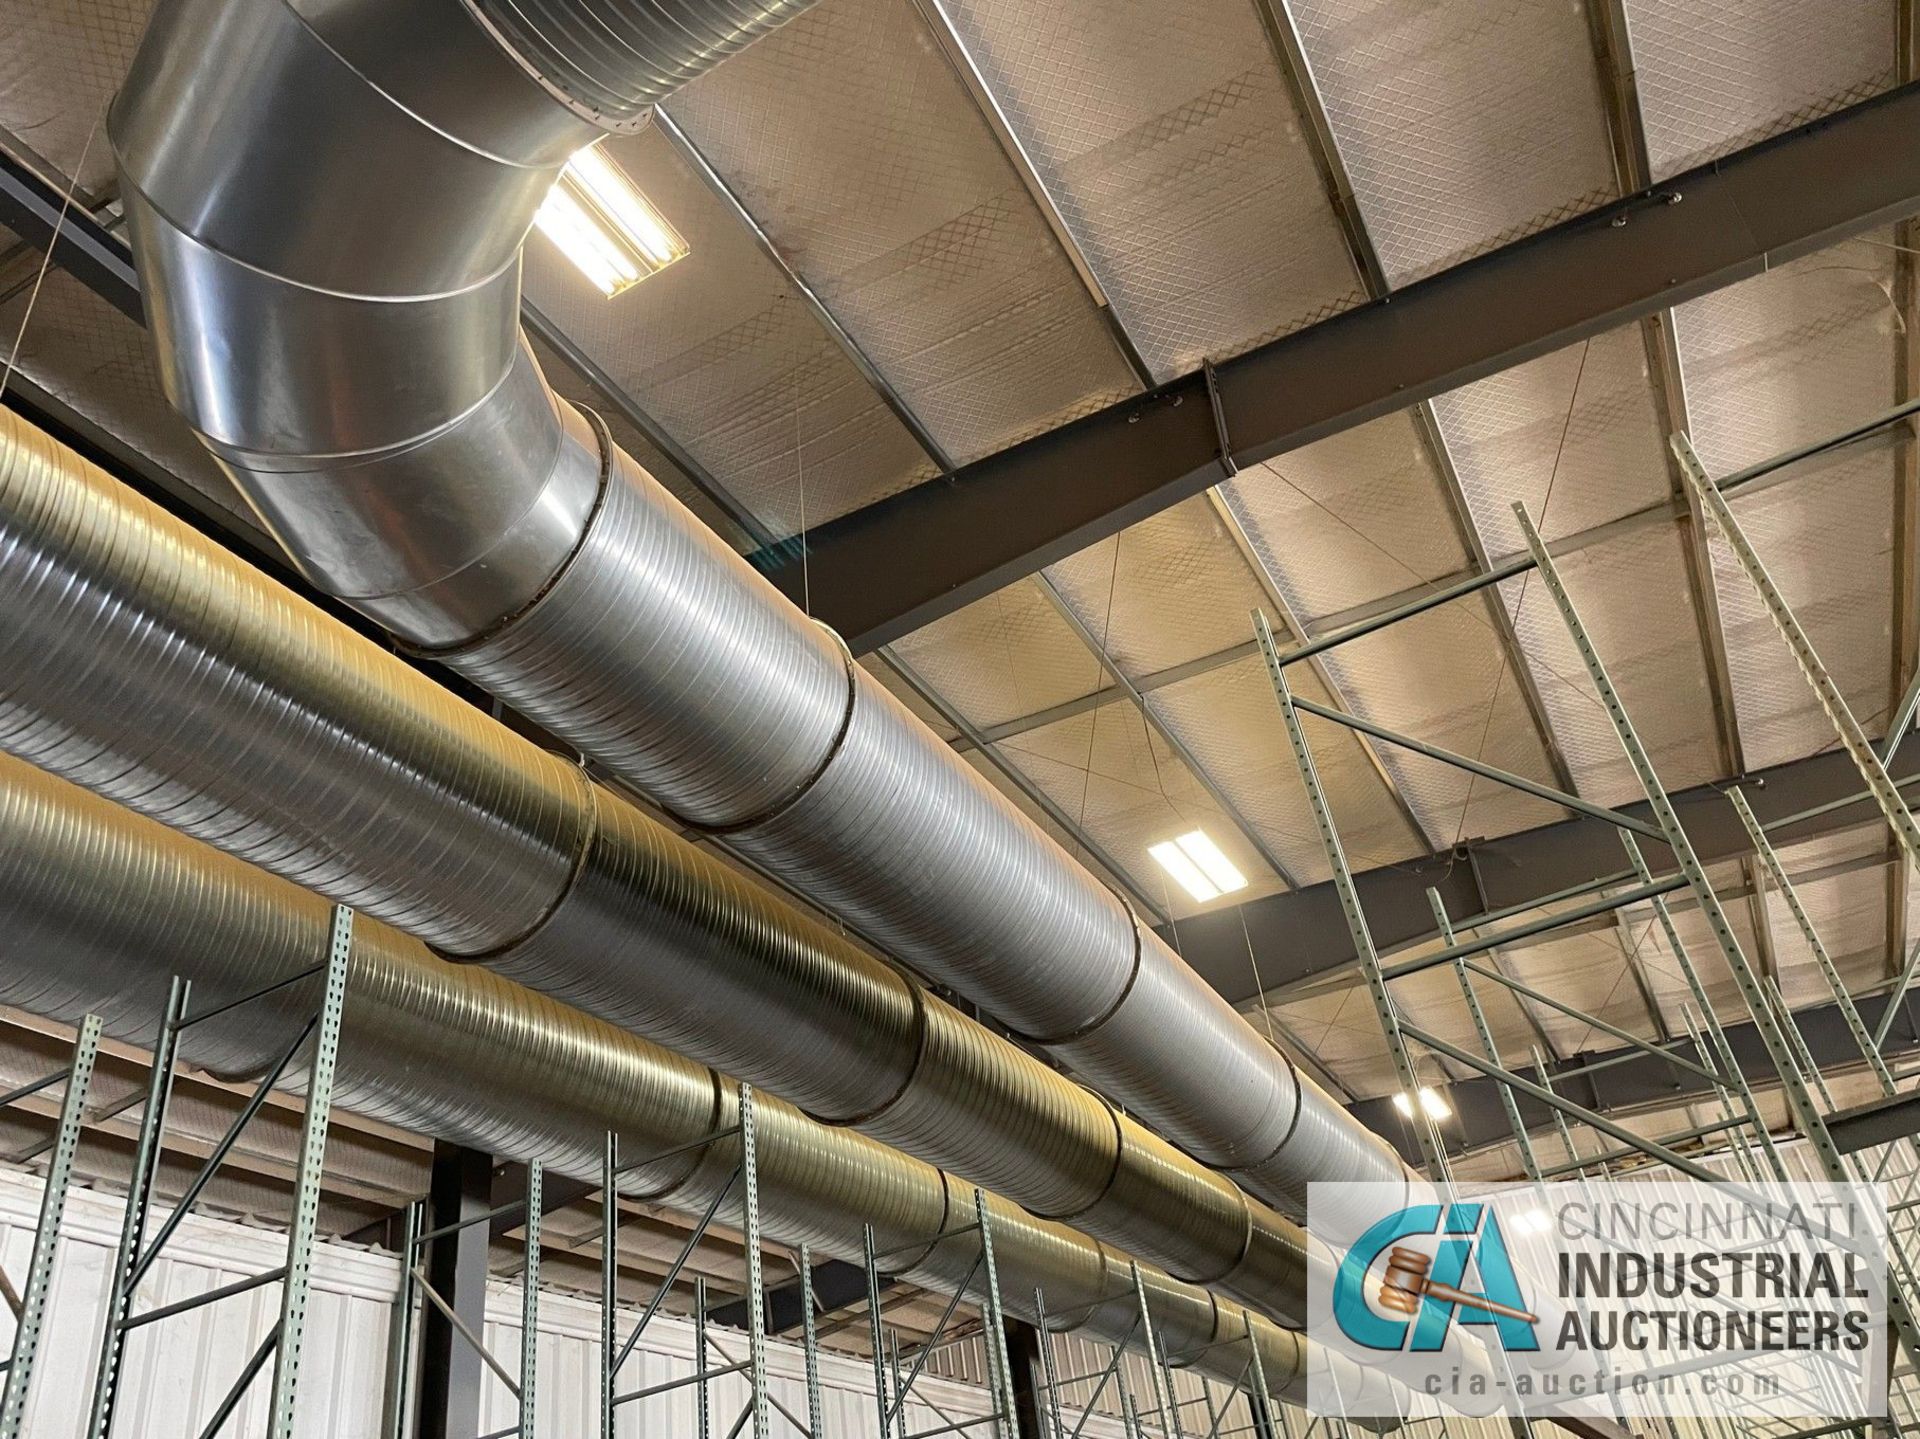 (LOT) DUCT WORK FOR LOT 2 BLOWER; APPROX. 85' 37.5" DIA. SPIRAL DUCT AND APPROX. 200" HIGH 36" X 36" - Image 12 of 15